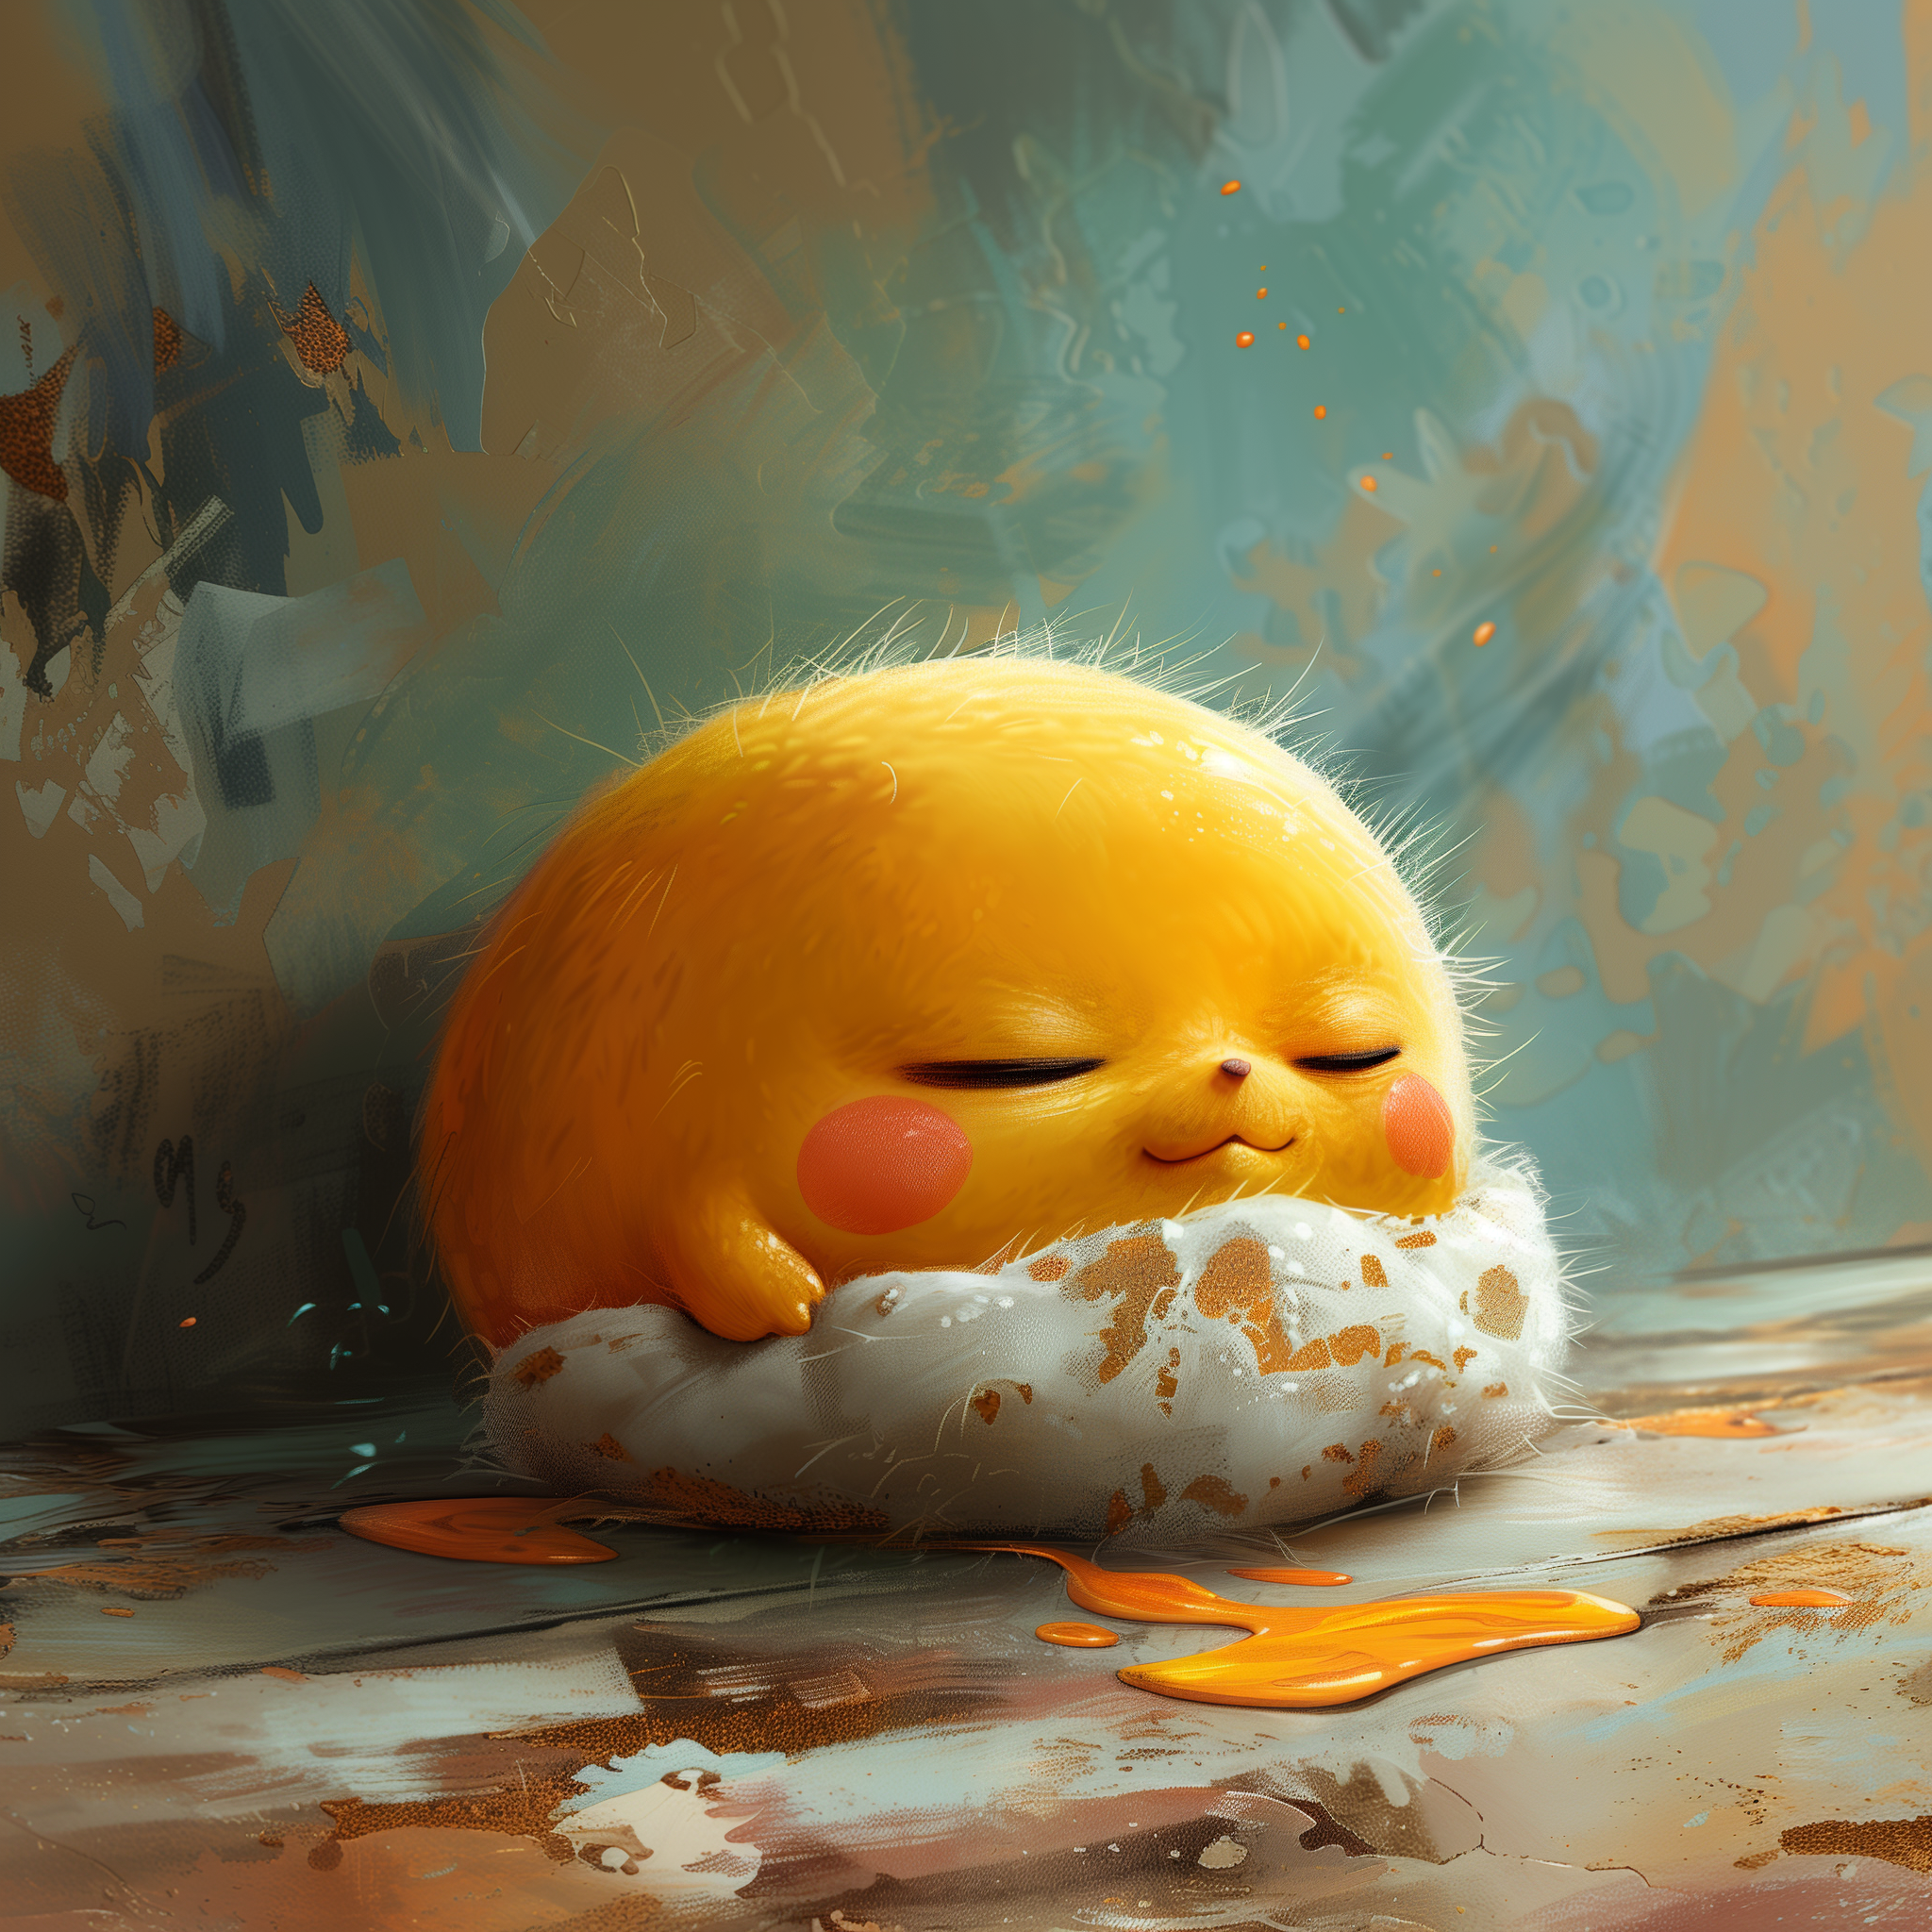 Avatar of Gudetama, the lazy egg cartoon character, lounging atop a dollop of white rice.